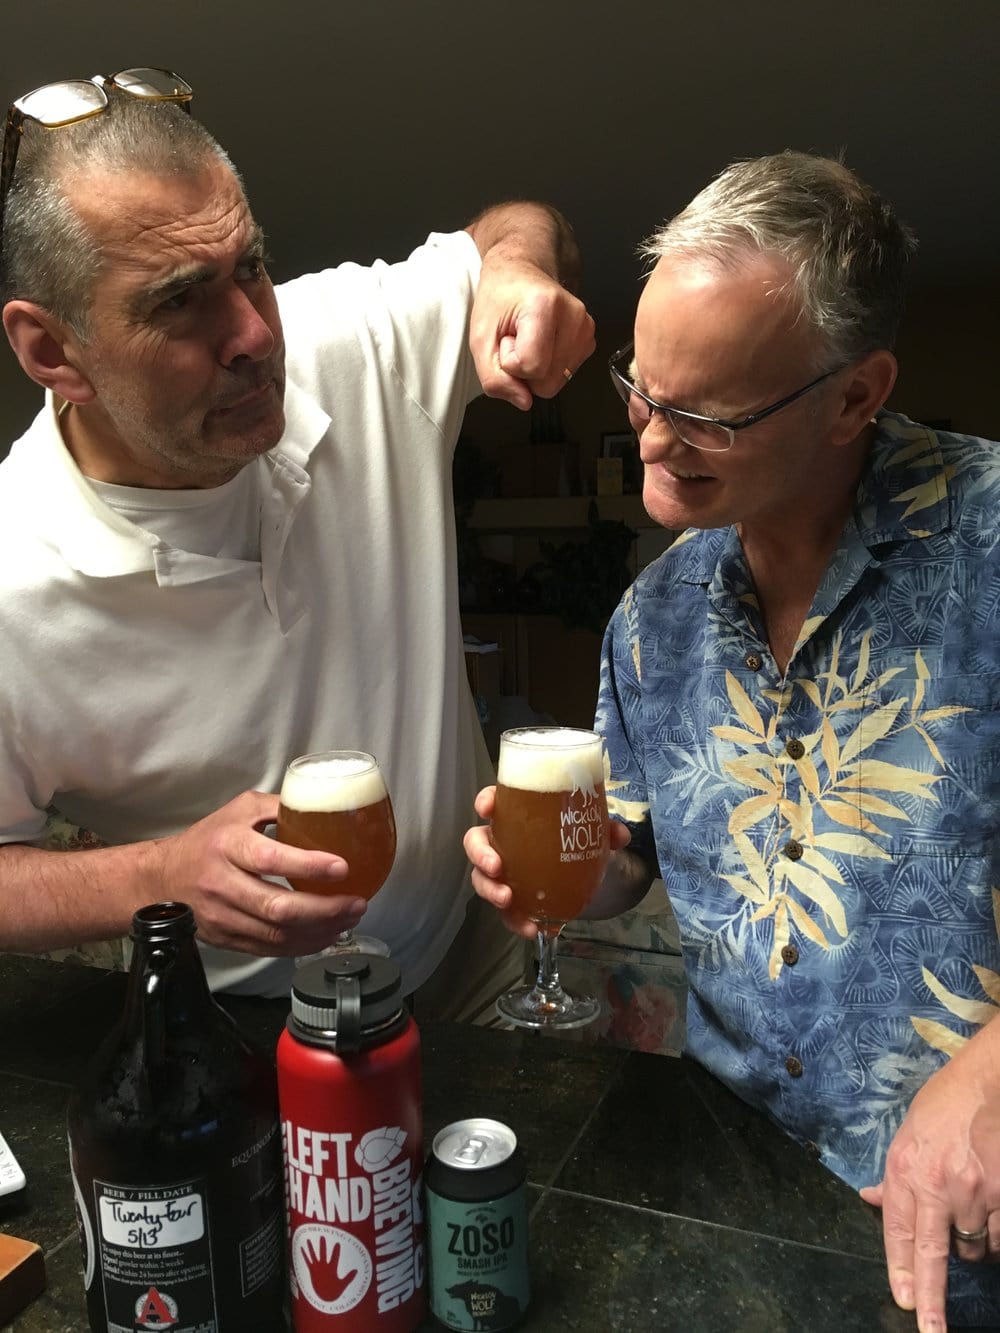 Paul and Norm drinking beer, Paul punching Norm in the face